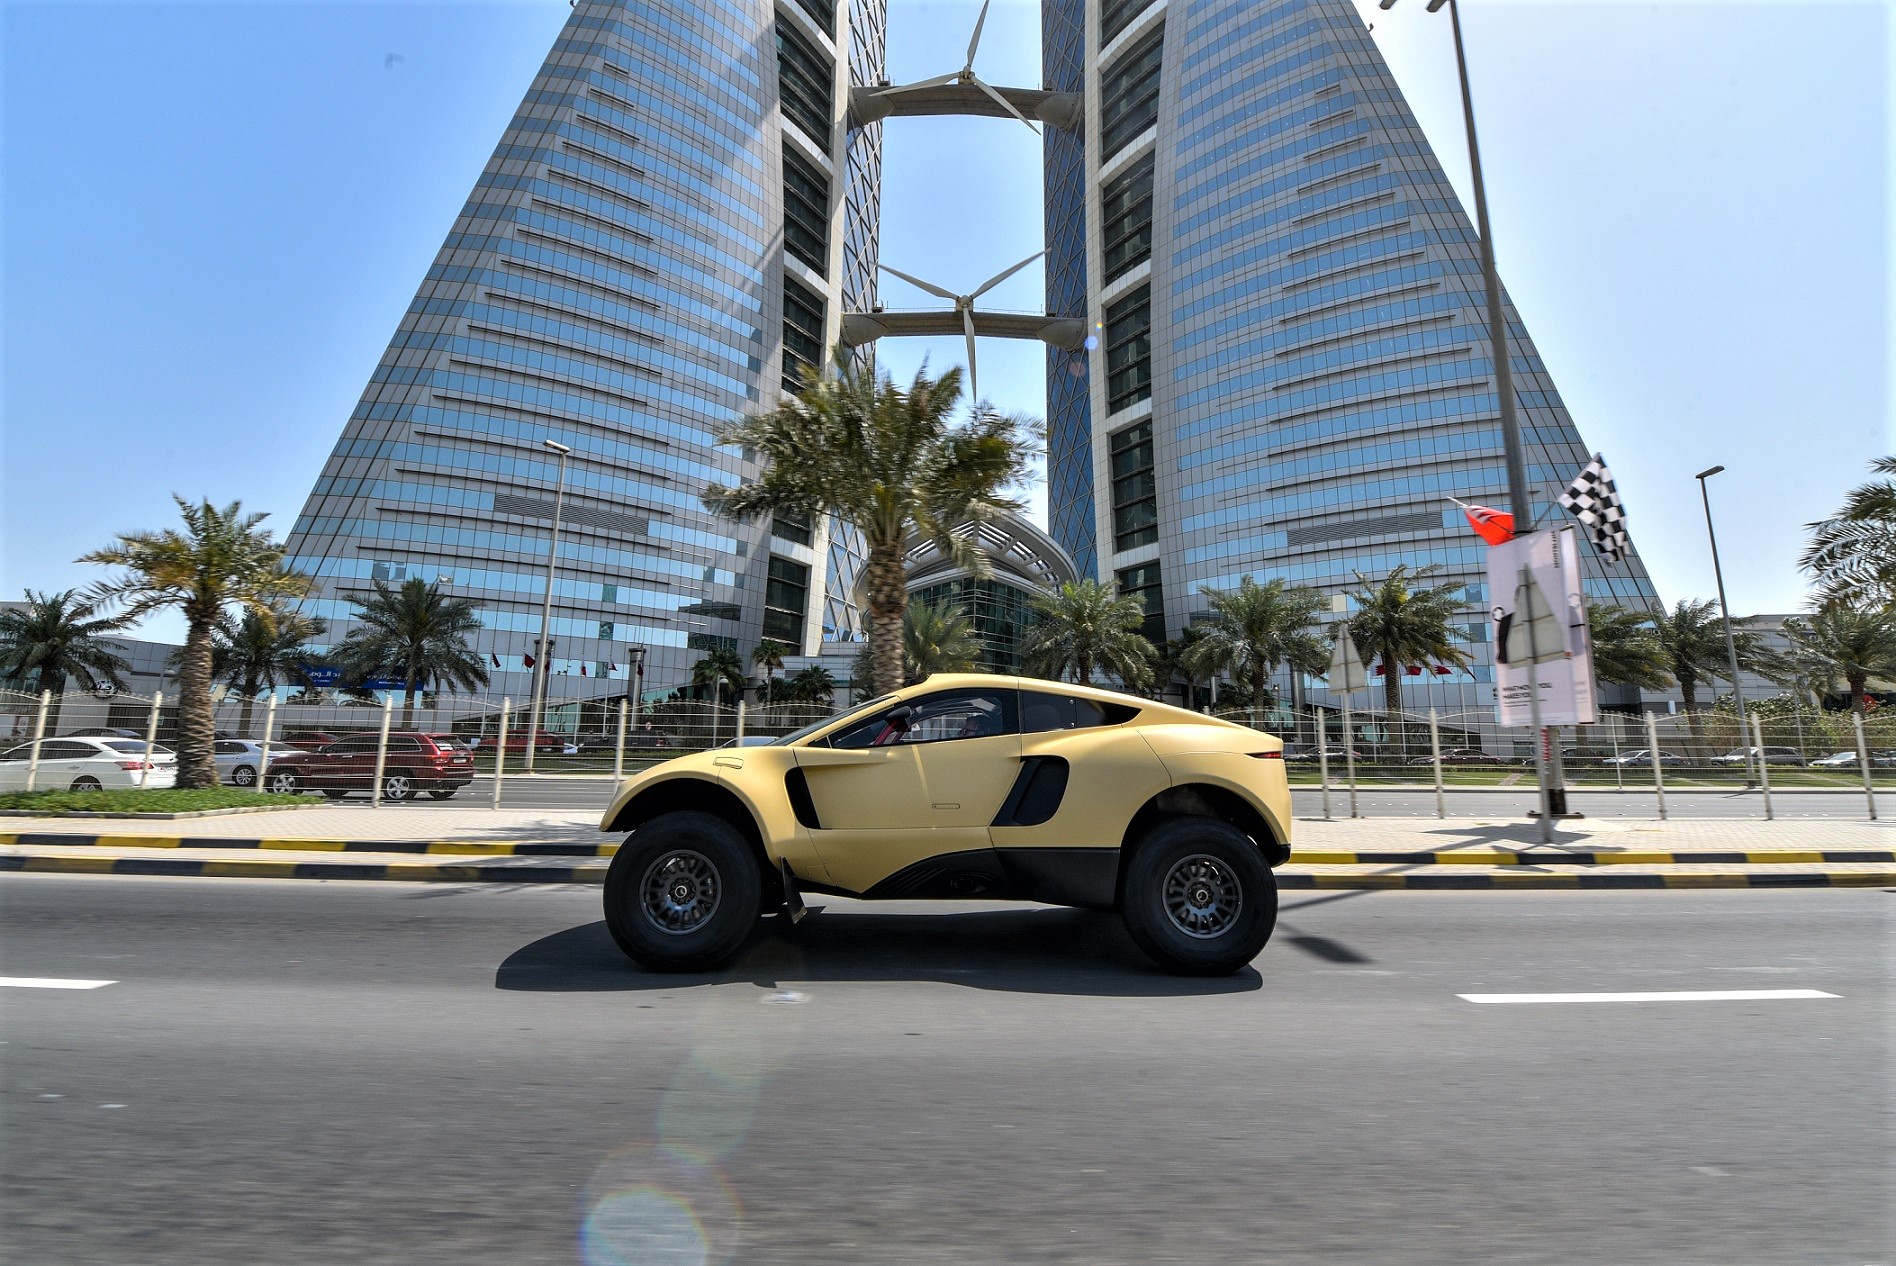 Out and about in Bahrain, eye-catching Hunter fits everyday urban  streets as well as rugged terrain